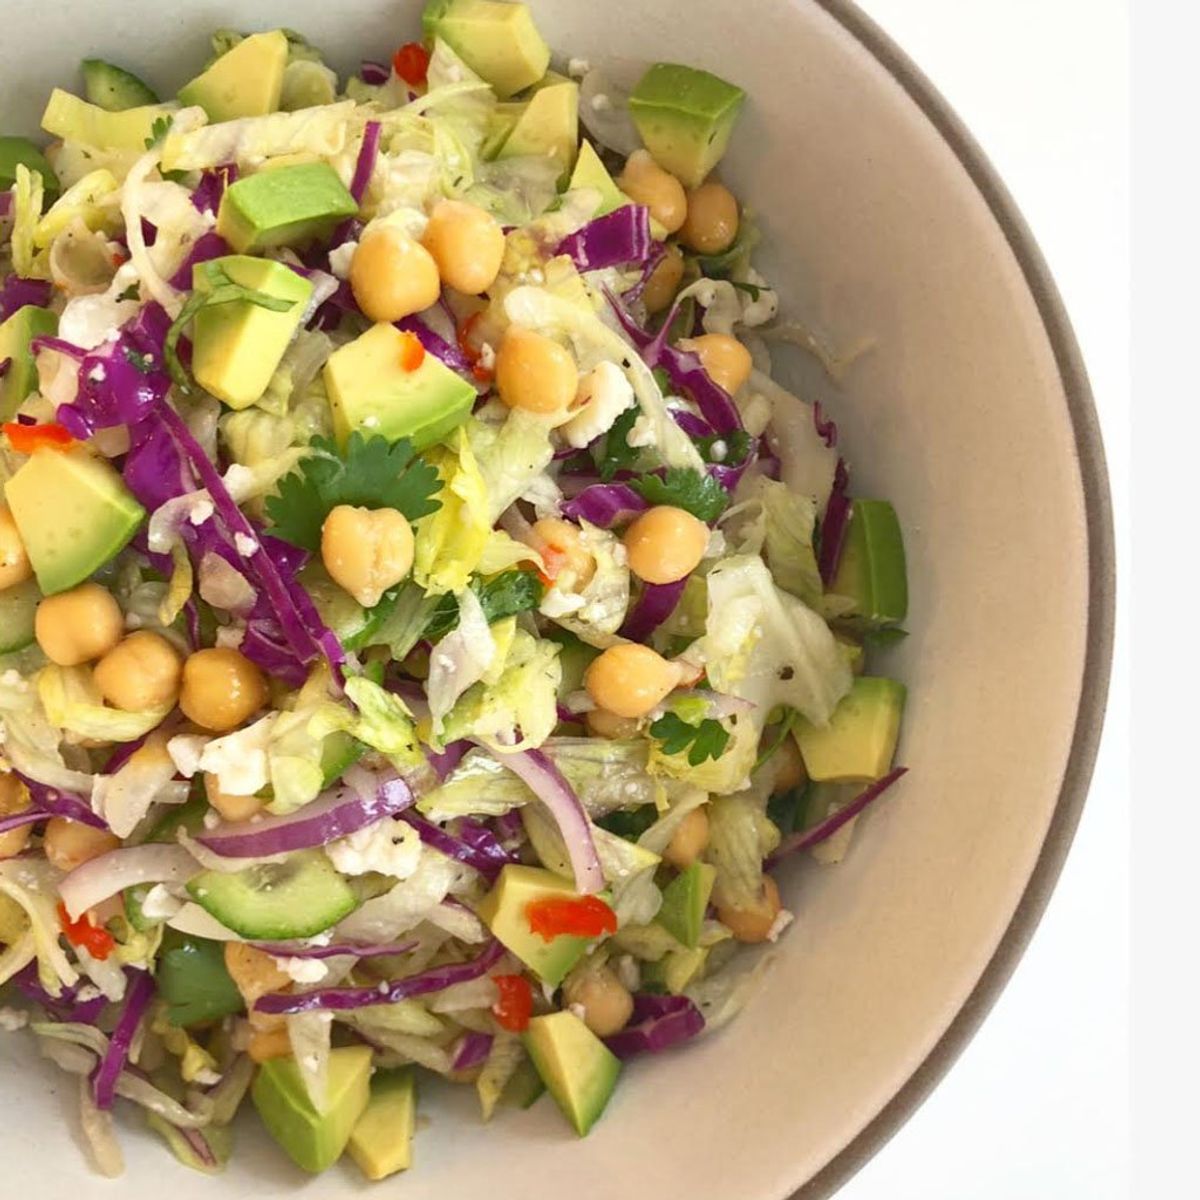 Salad with cabbage, avocado, chickpeas, in a bowl.